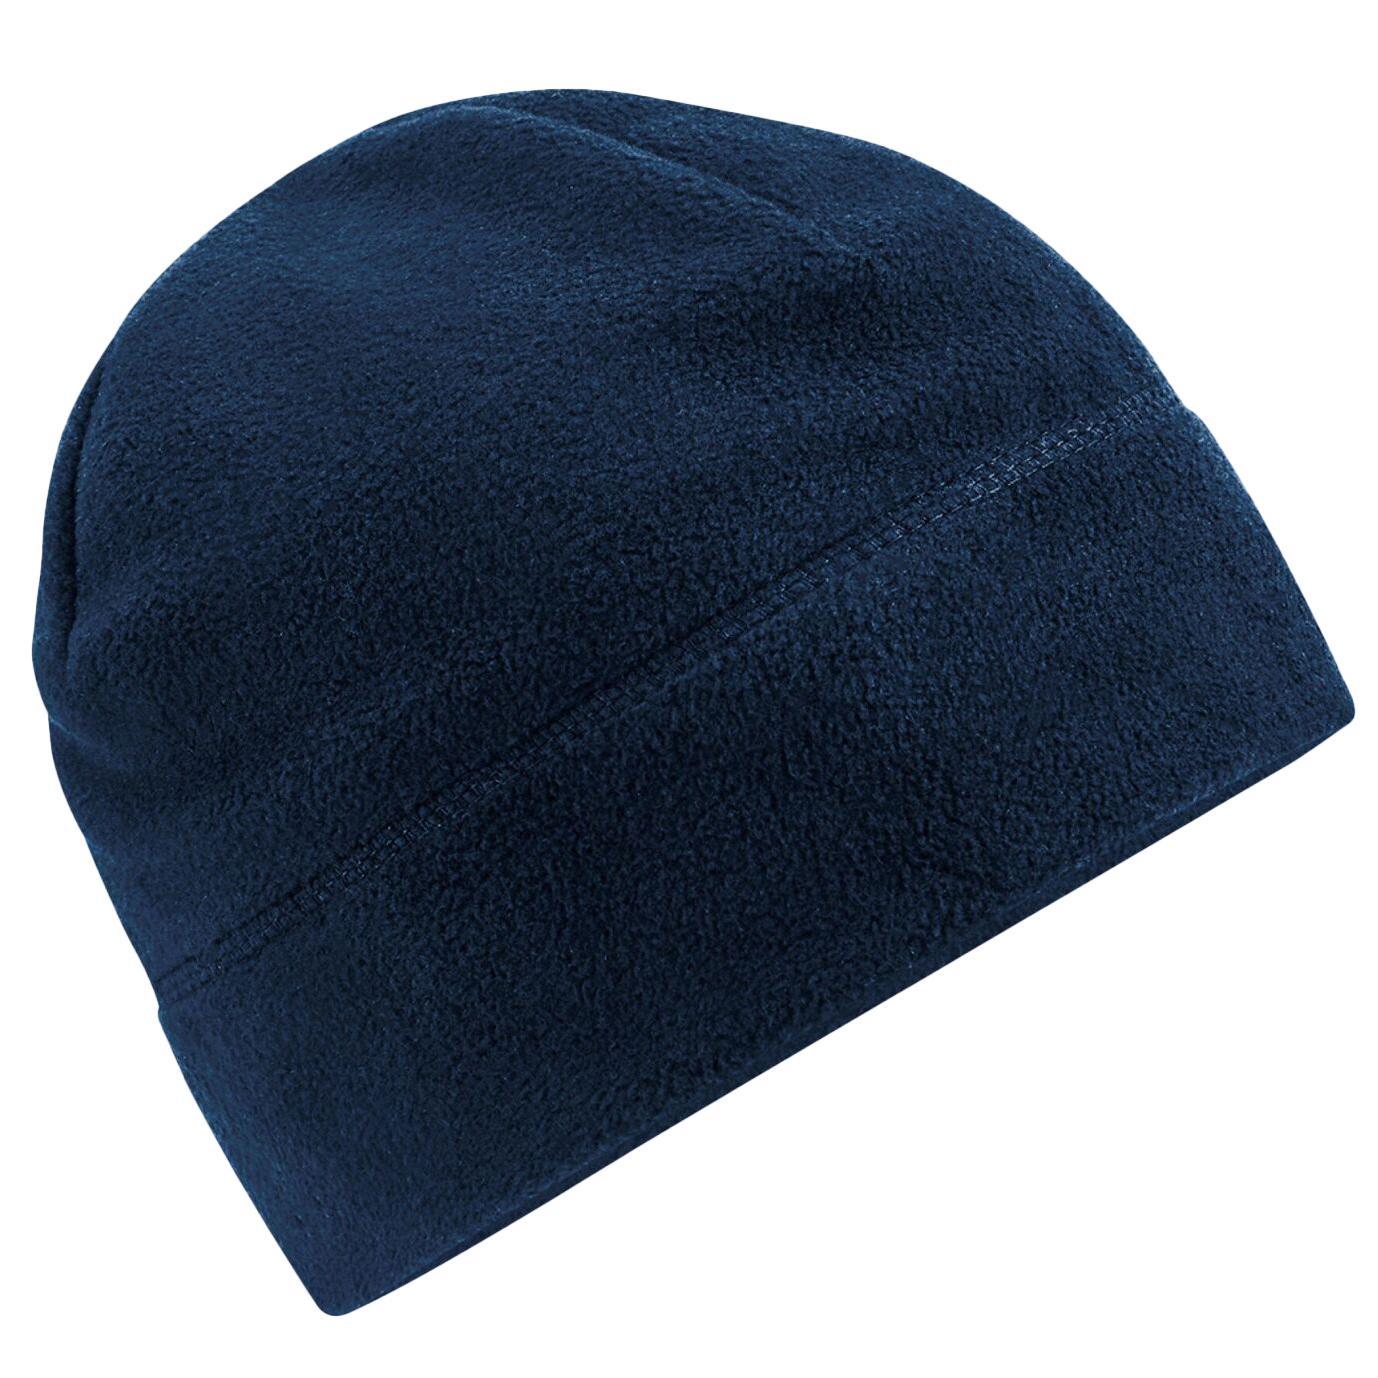 Beechfield Unisex Adult Fleece Recycled Beanie (French Navy) (One Size)